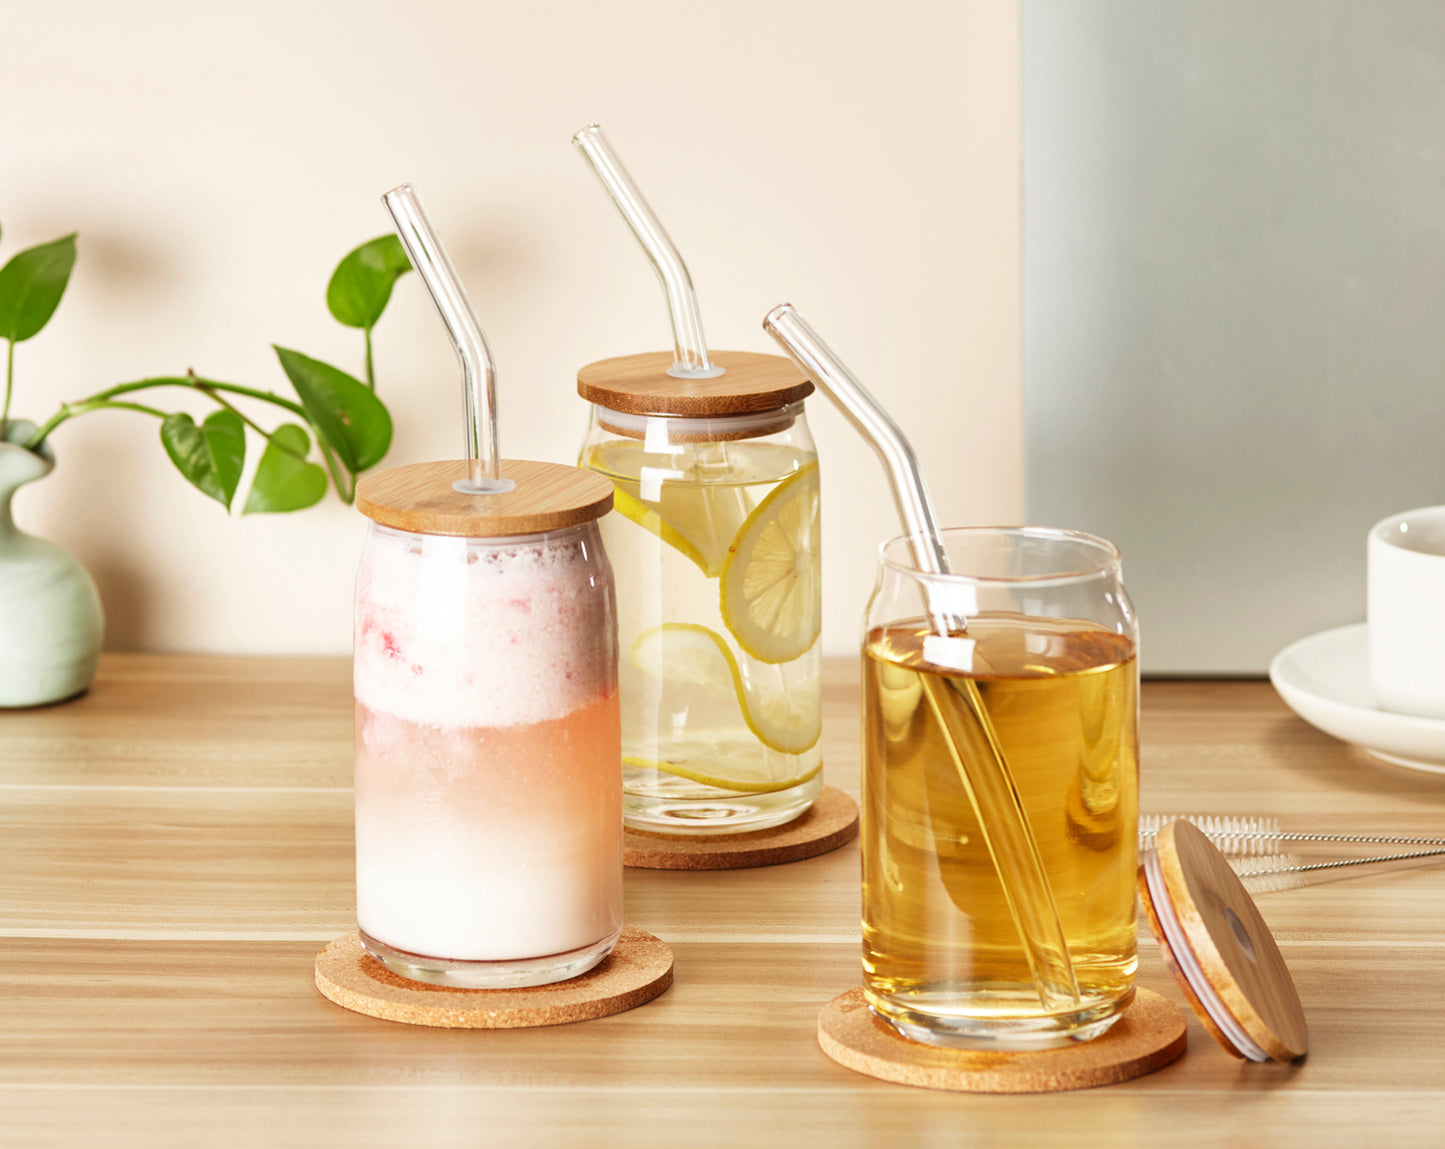 Drinking Glasses with Bamboo Lids and Glass Straw 4pcs Set